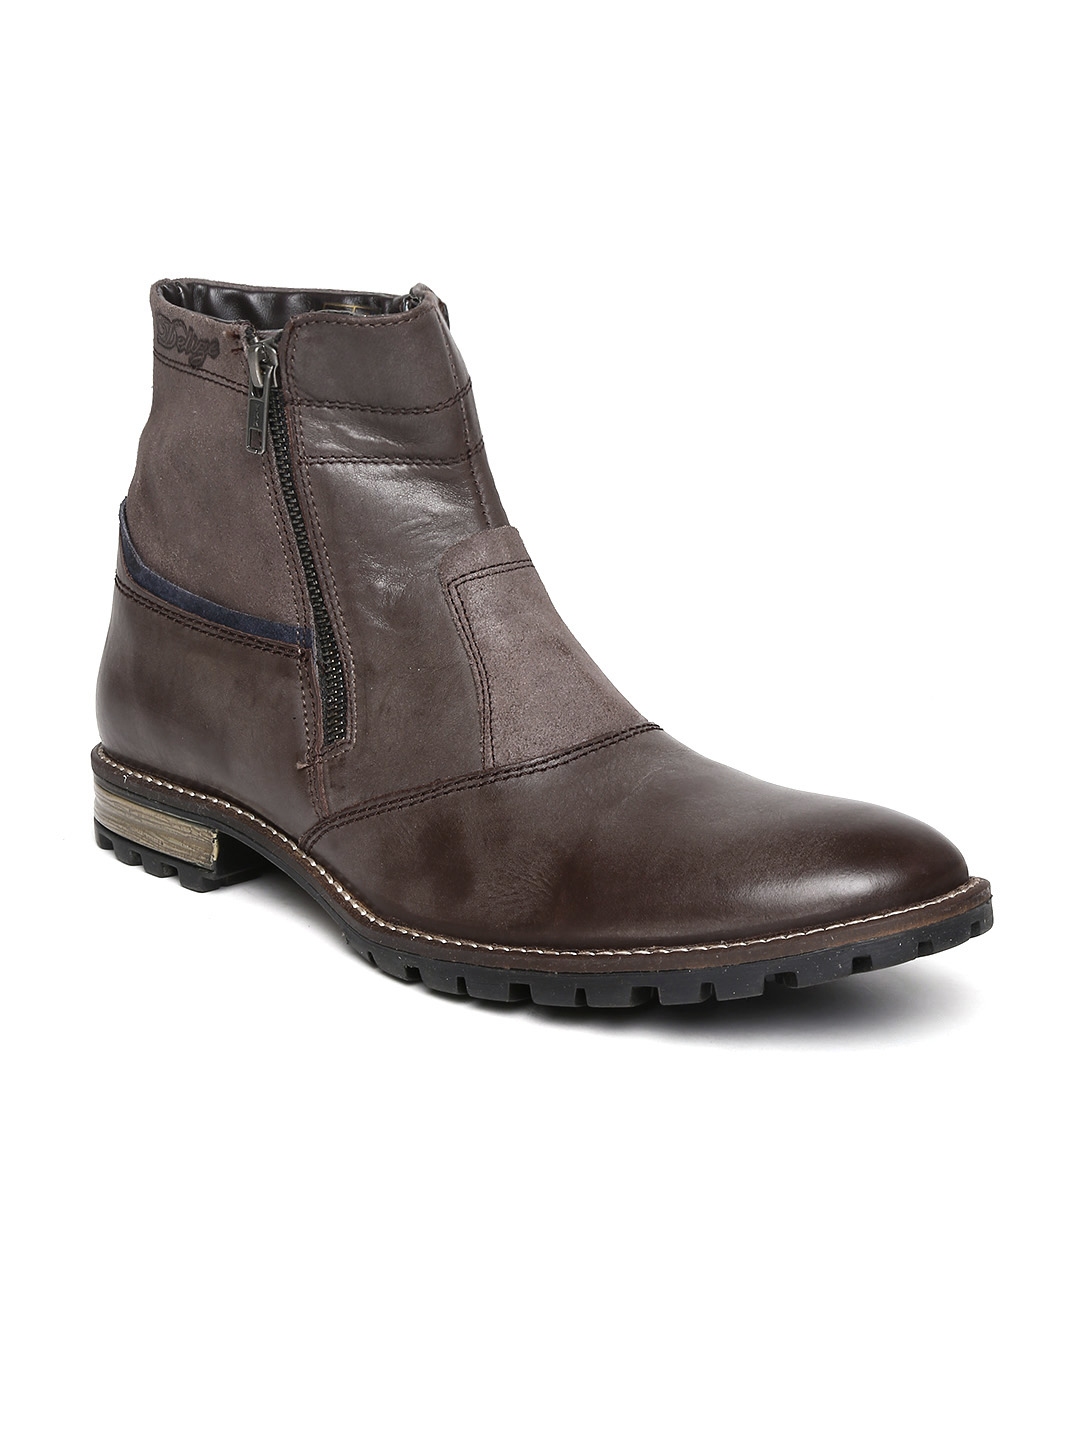 Buy Delize Men Brown Leather Boots 